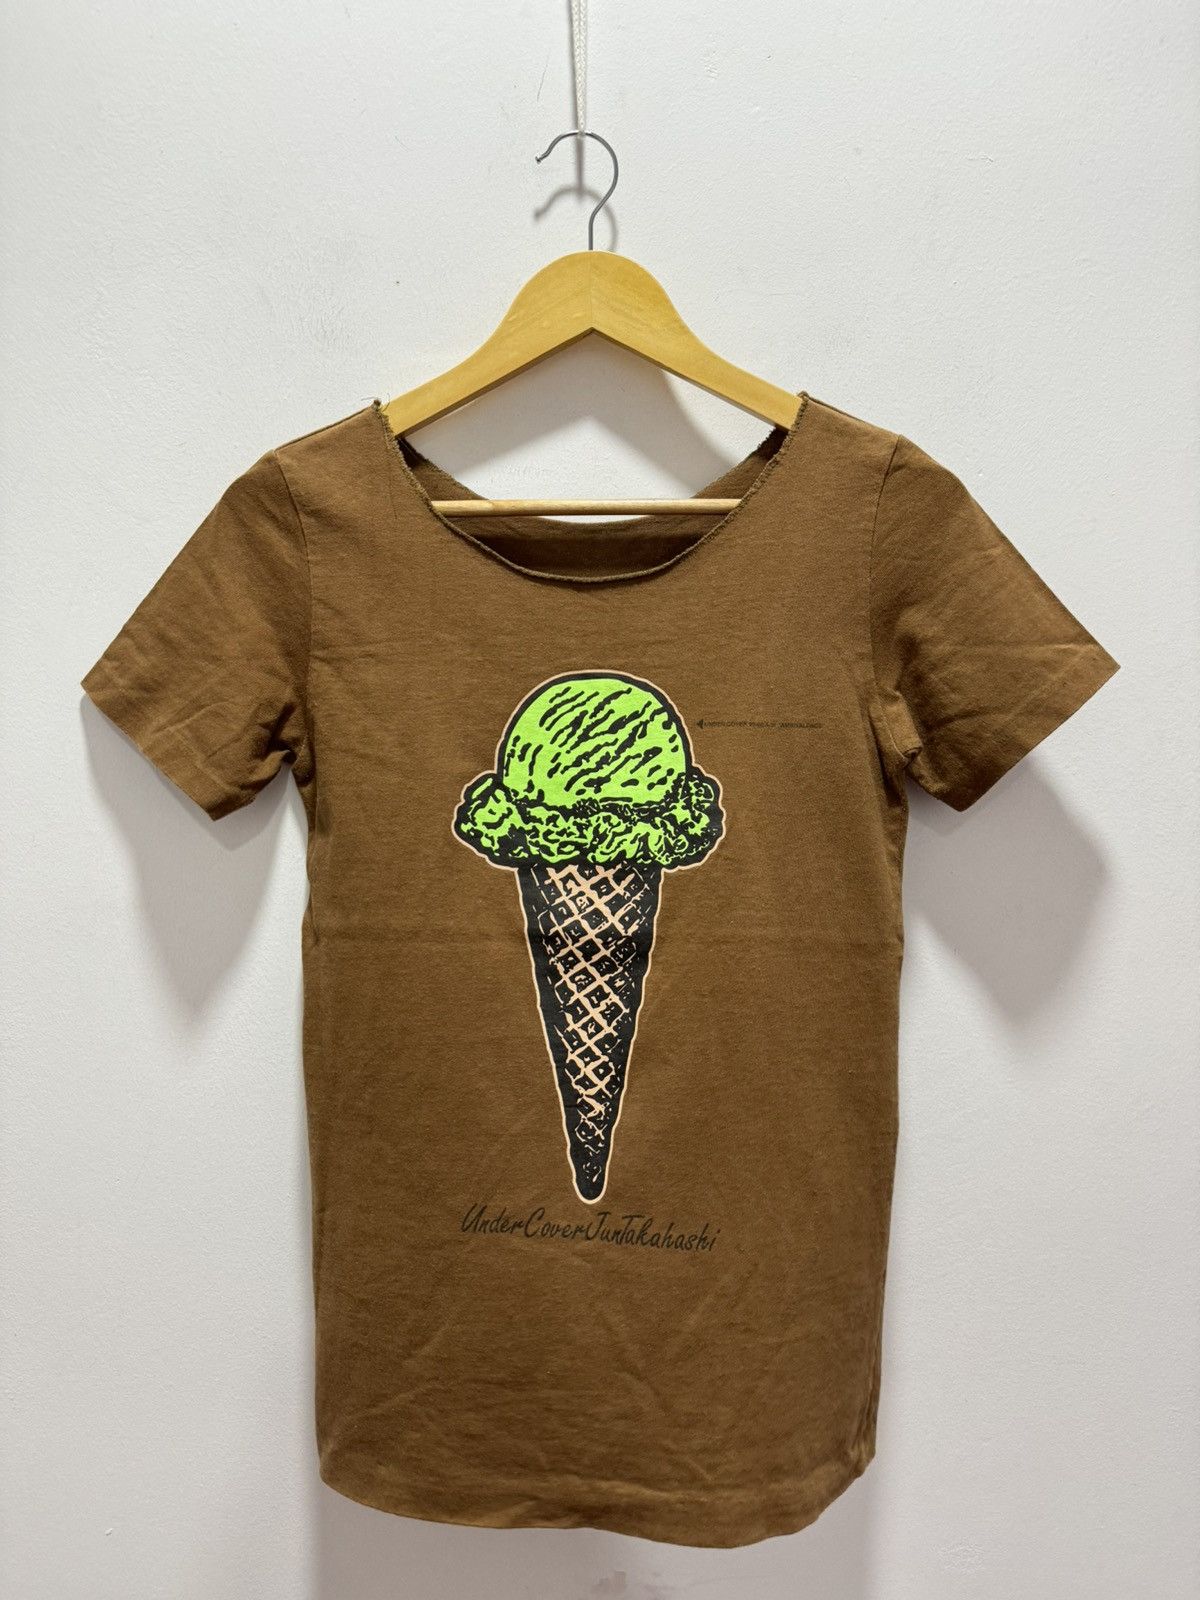 Undercover UNDERCOVER 99-00 AW AMBIVALENCE ICE CREAM CROP TOP TEE | Grailed